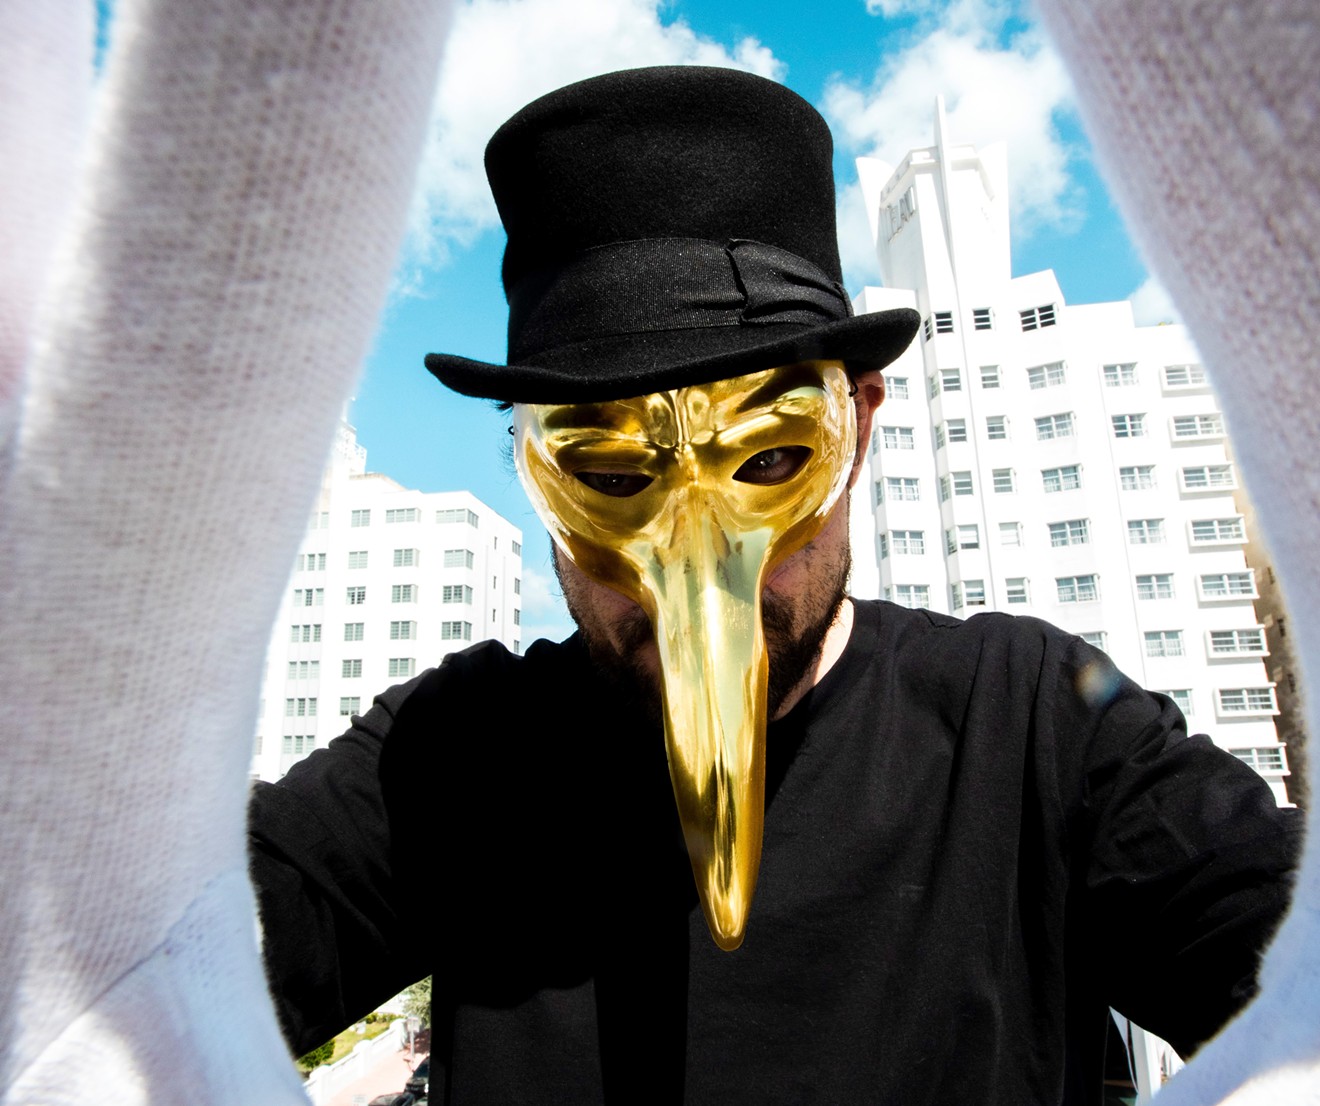 Claptone has played some endurance-testing gigs around the world.